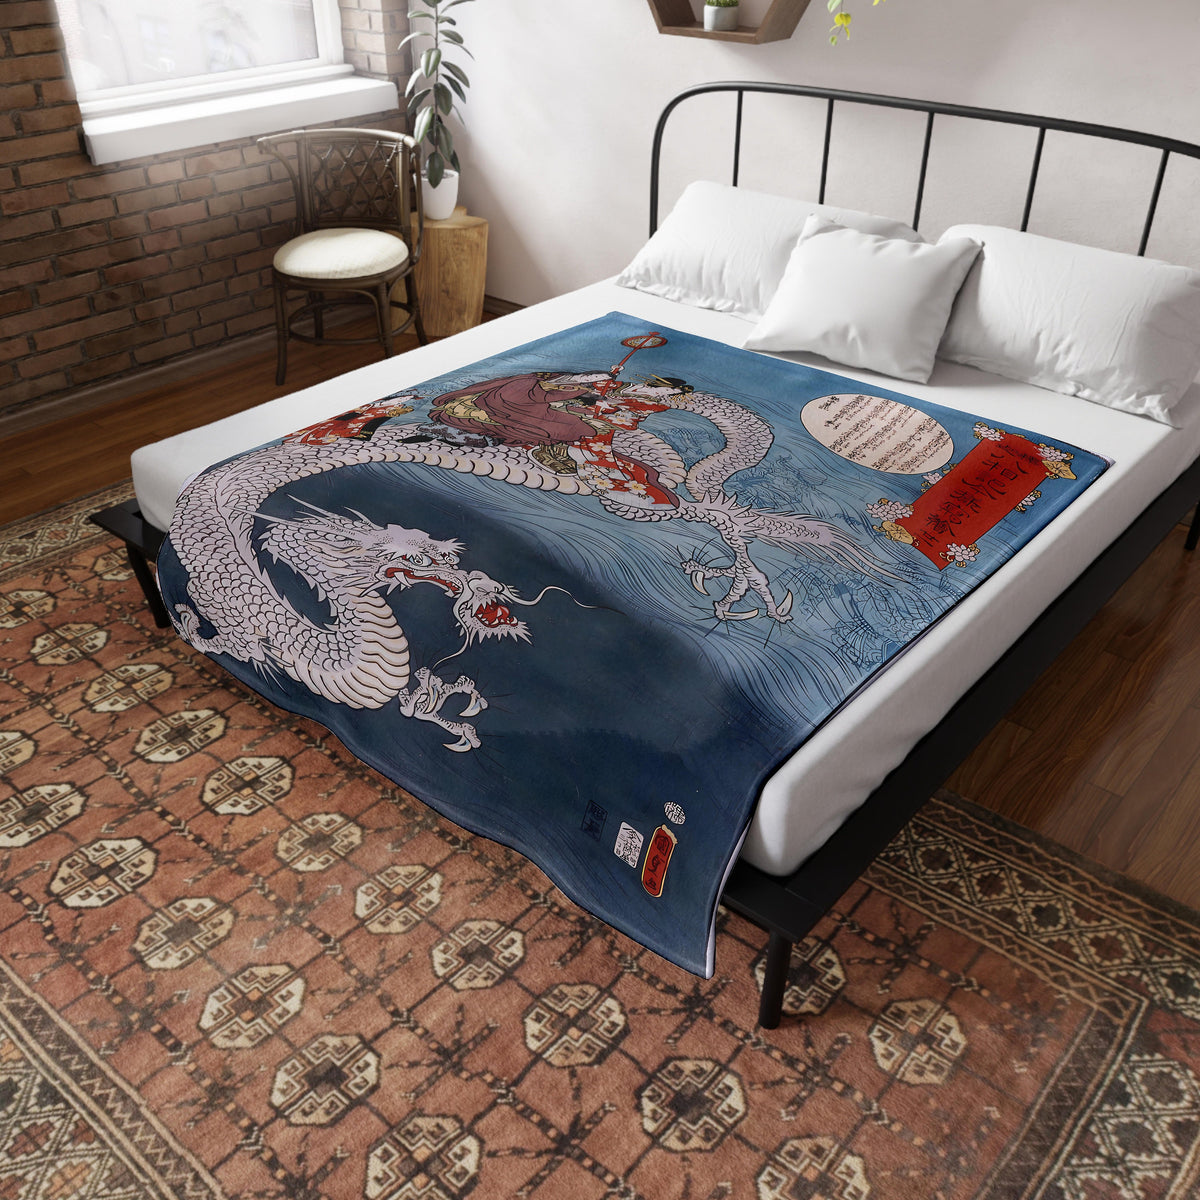 a bed with a dragon blanket on top of it